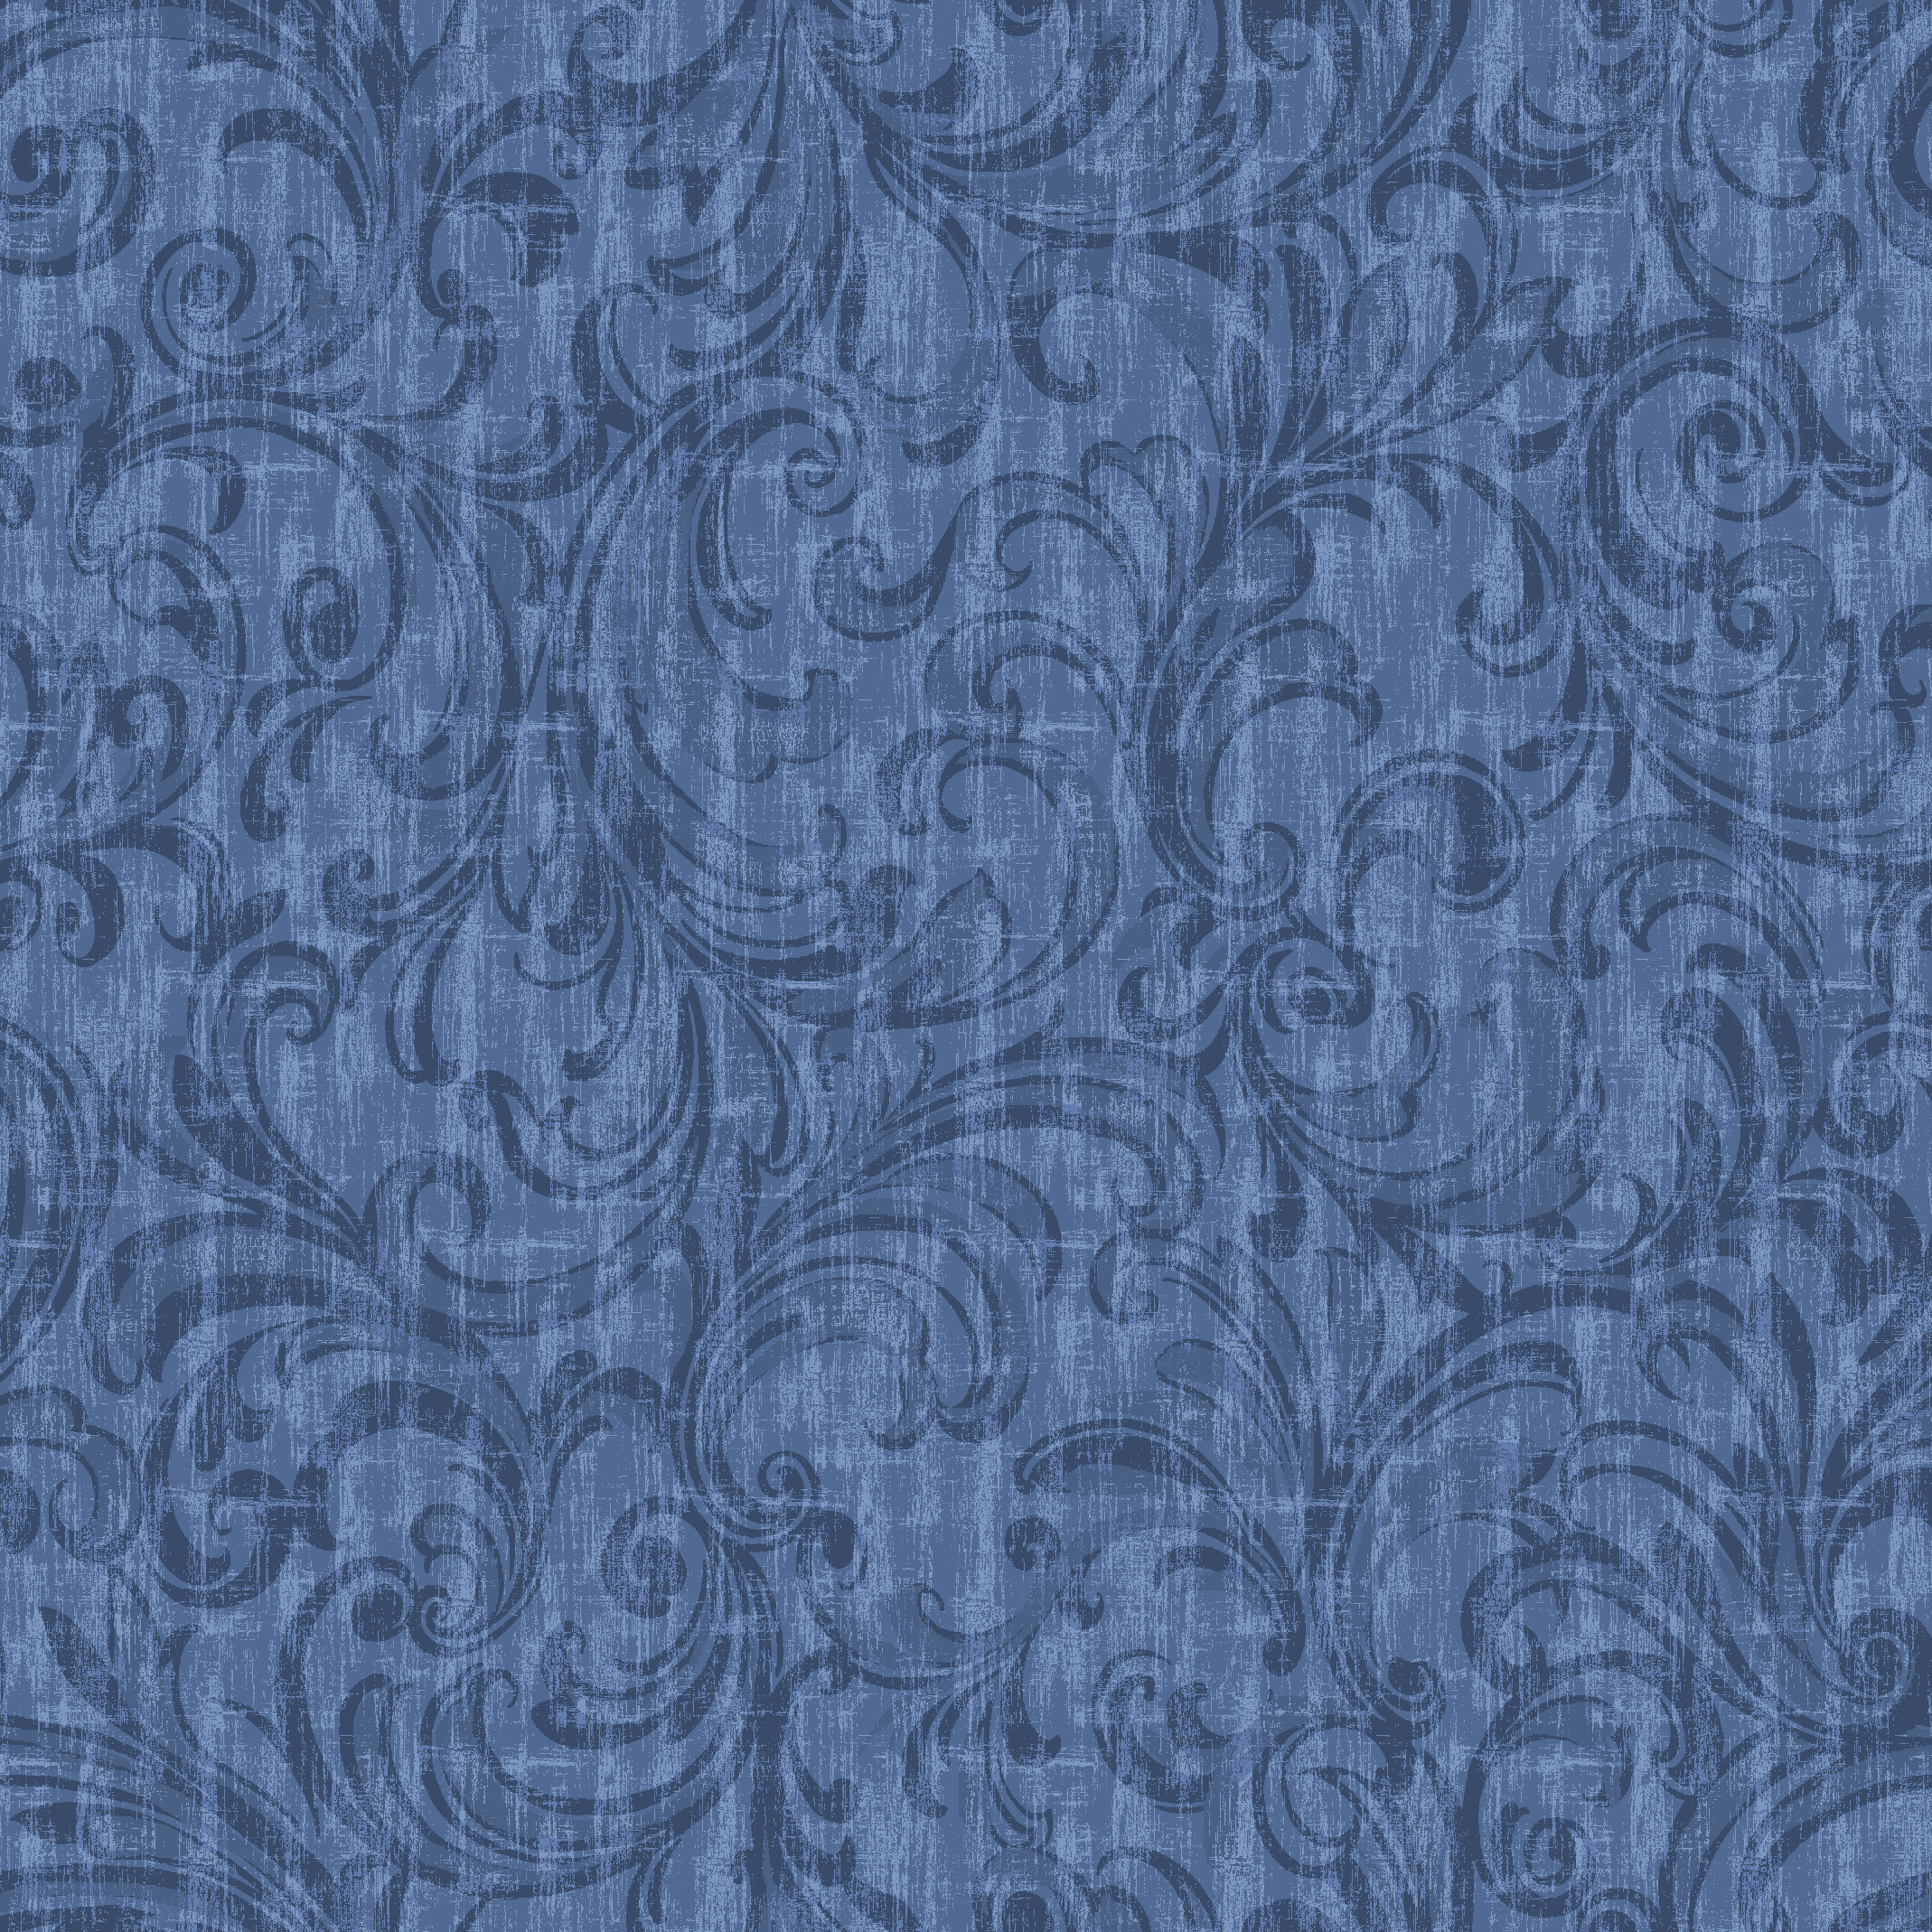 Waverly Inspirations Cotton 44" Dancing Scrolls Denim Color Sewing Fabric by the Yard